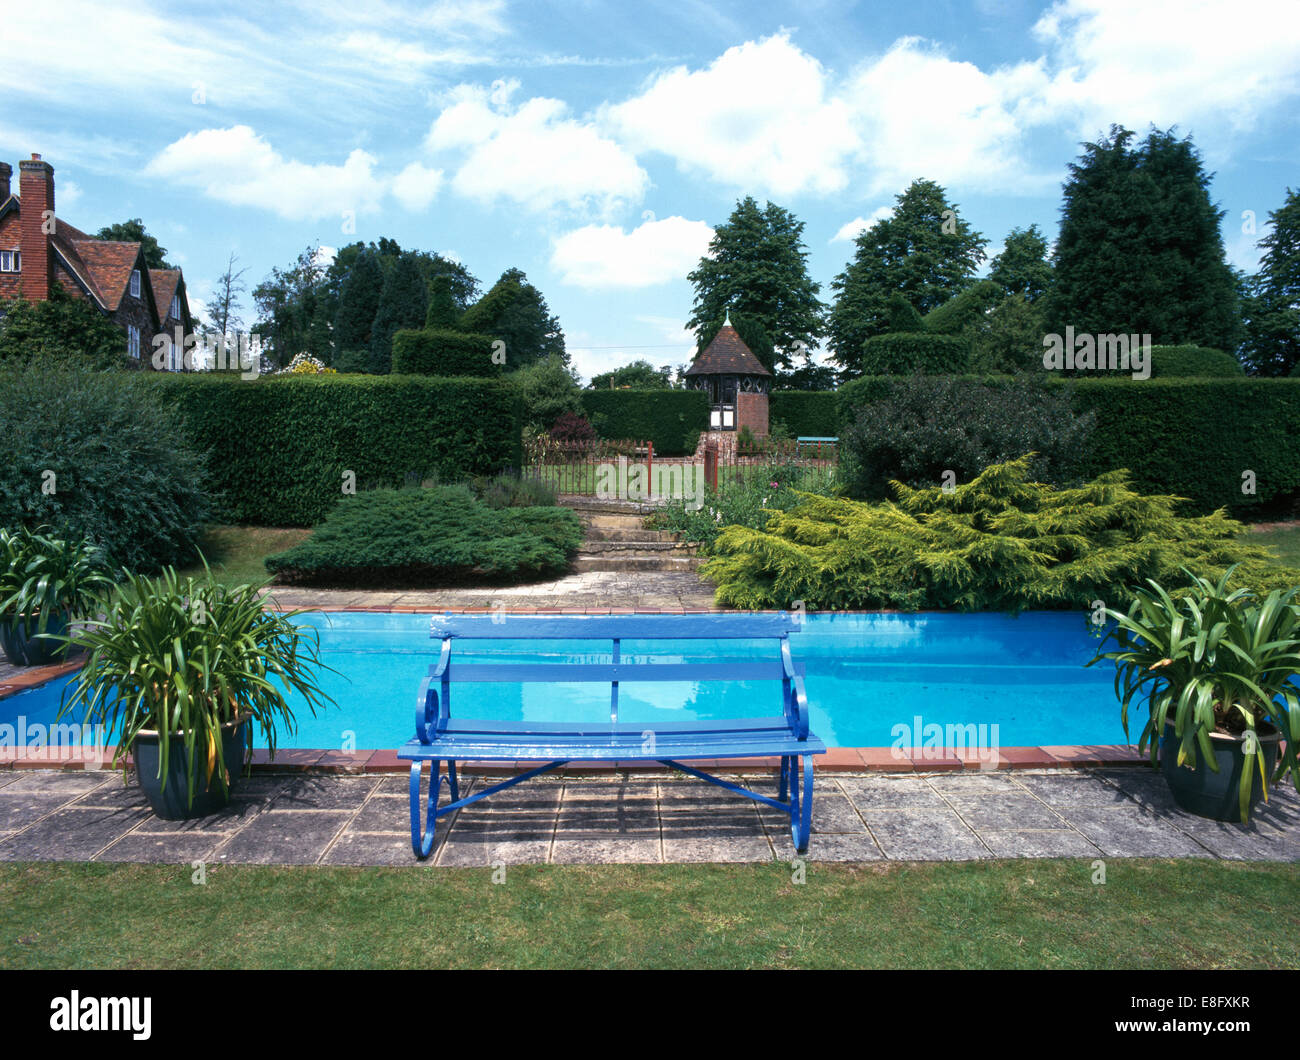 Blue painted bench on paving beside turquoise swimming pool in grounds of large country house Stock Photo